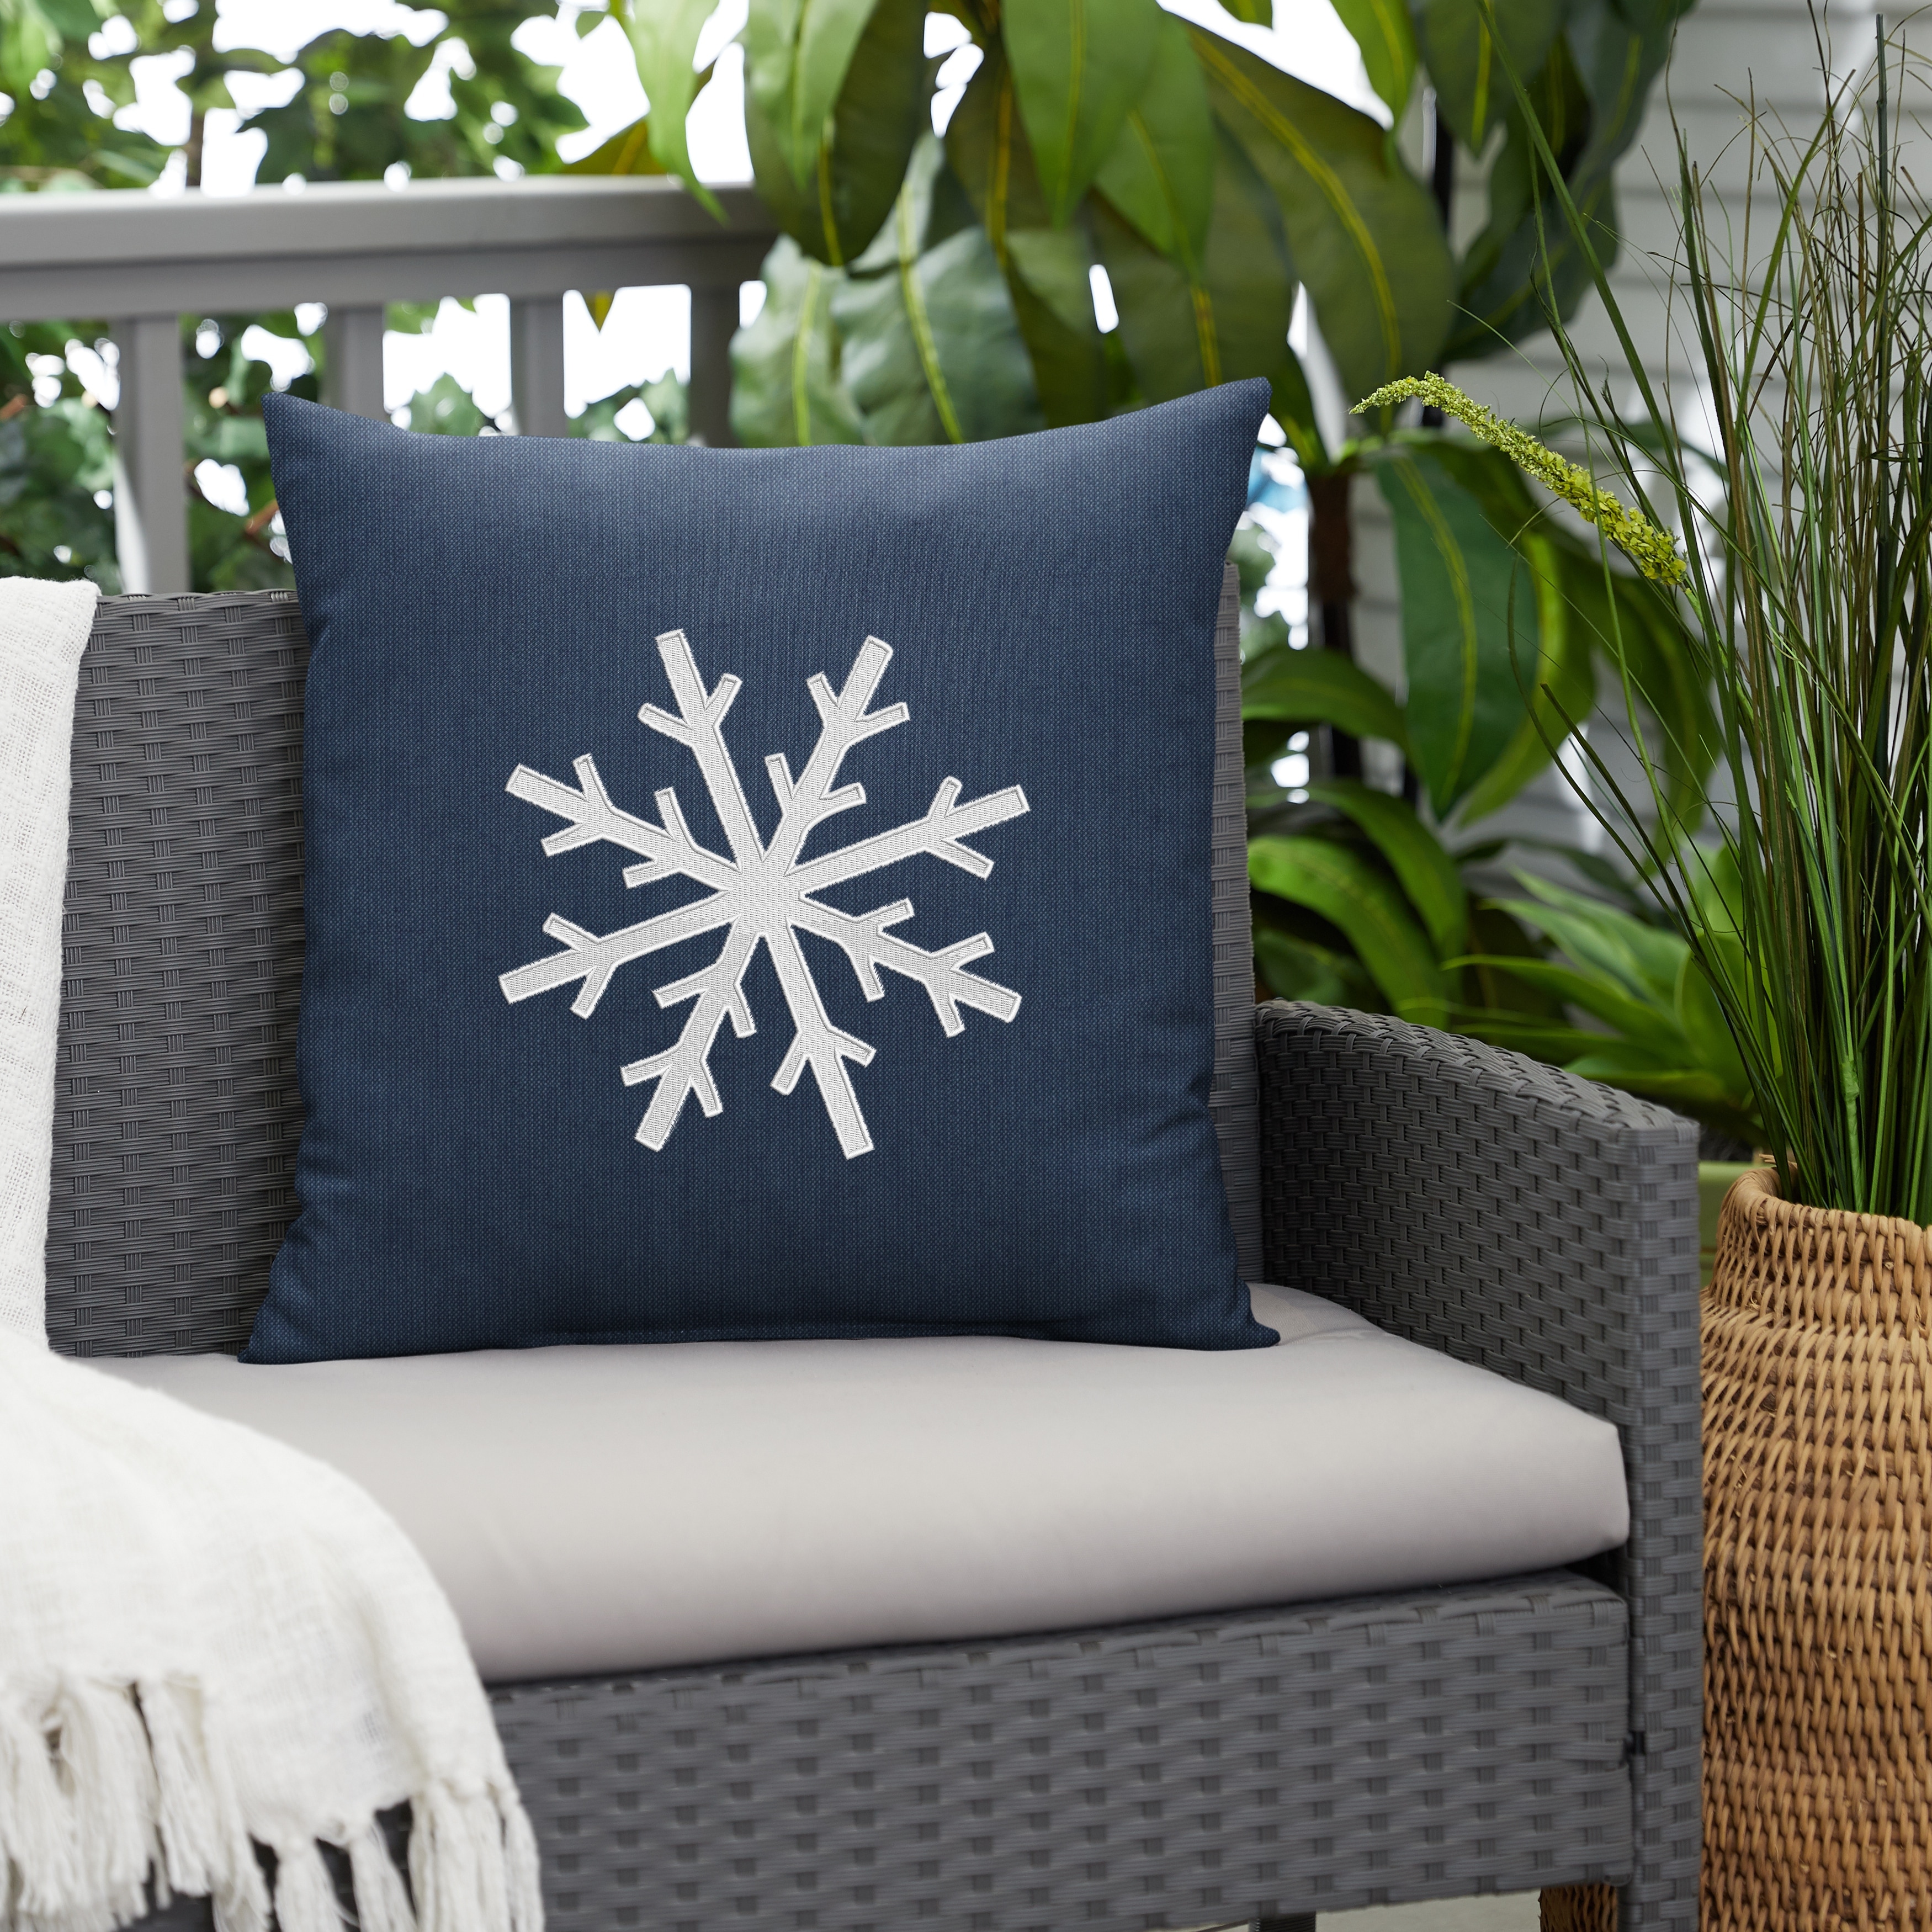 https://ak1.ostkcdn.com/images/products/is/images/direct/06a24736aaa34503bcba7390edeae6f0c9509406/Snowflake-Sunbrella-Indoor--Outdoor-Pillow%2C-18-in-x-18-in.jpg